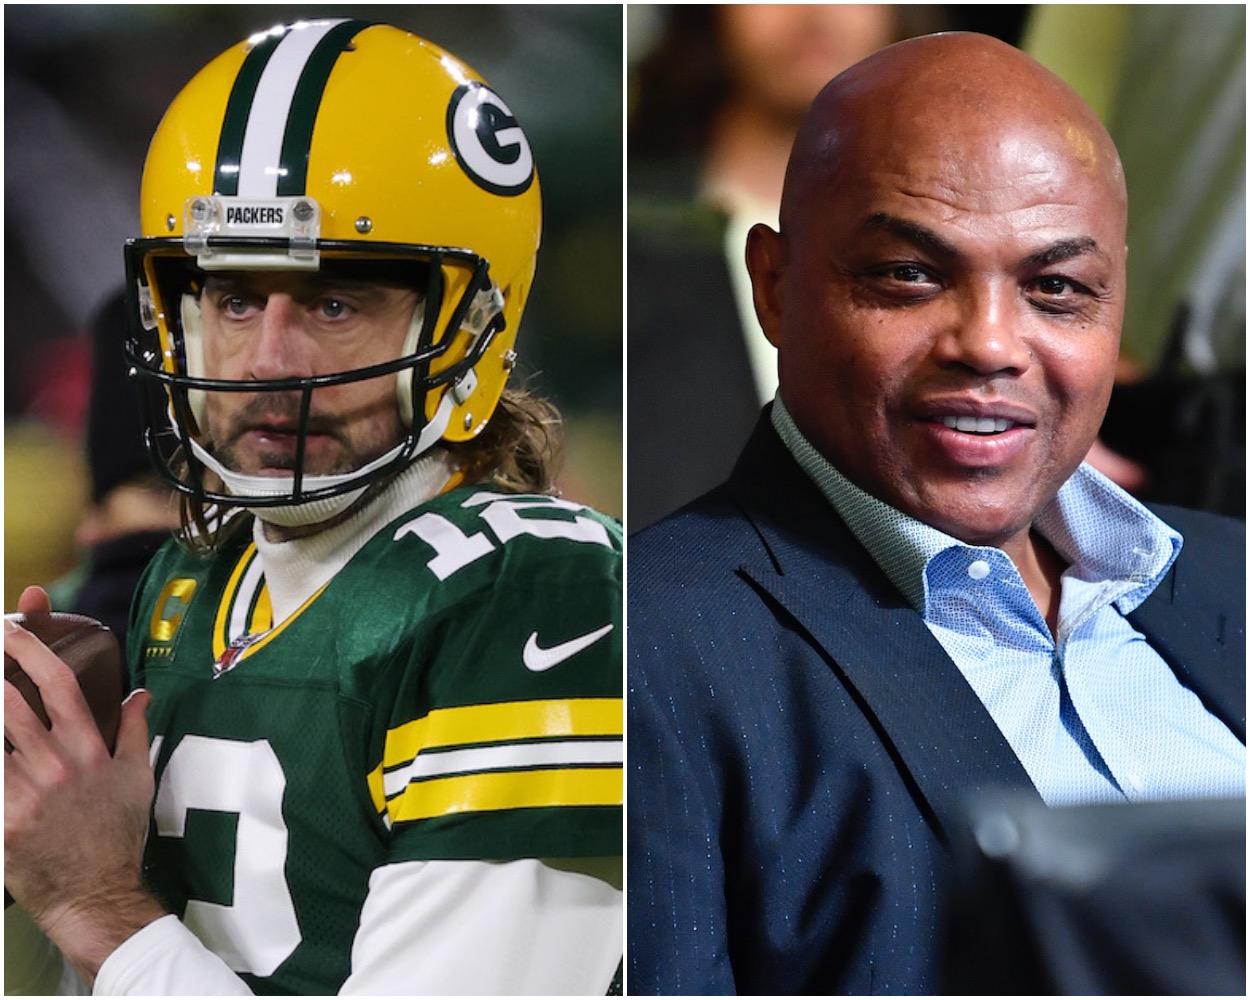 Aaron Rodgers Gets Brutally Insulted by NBA Legend Charles Barkley